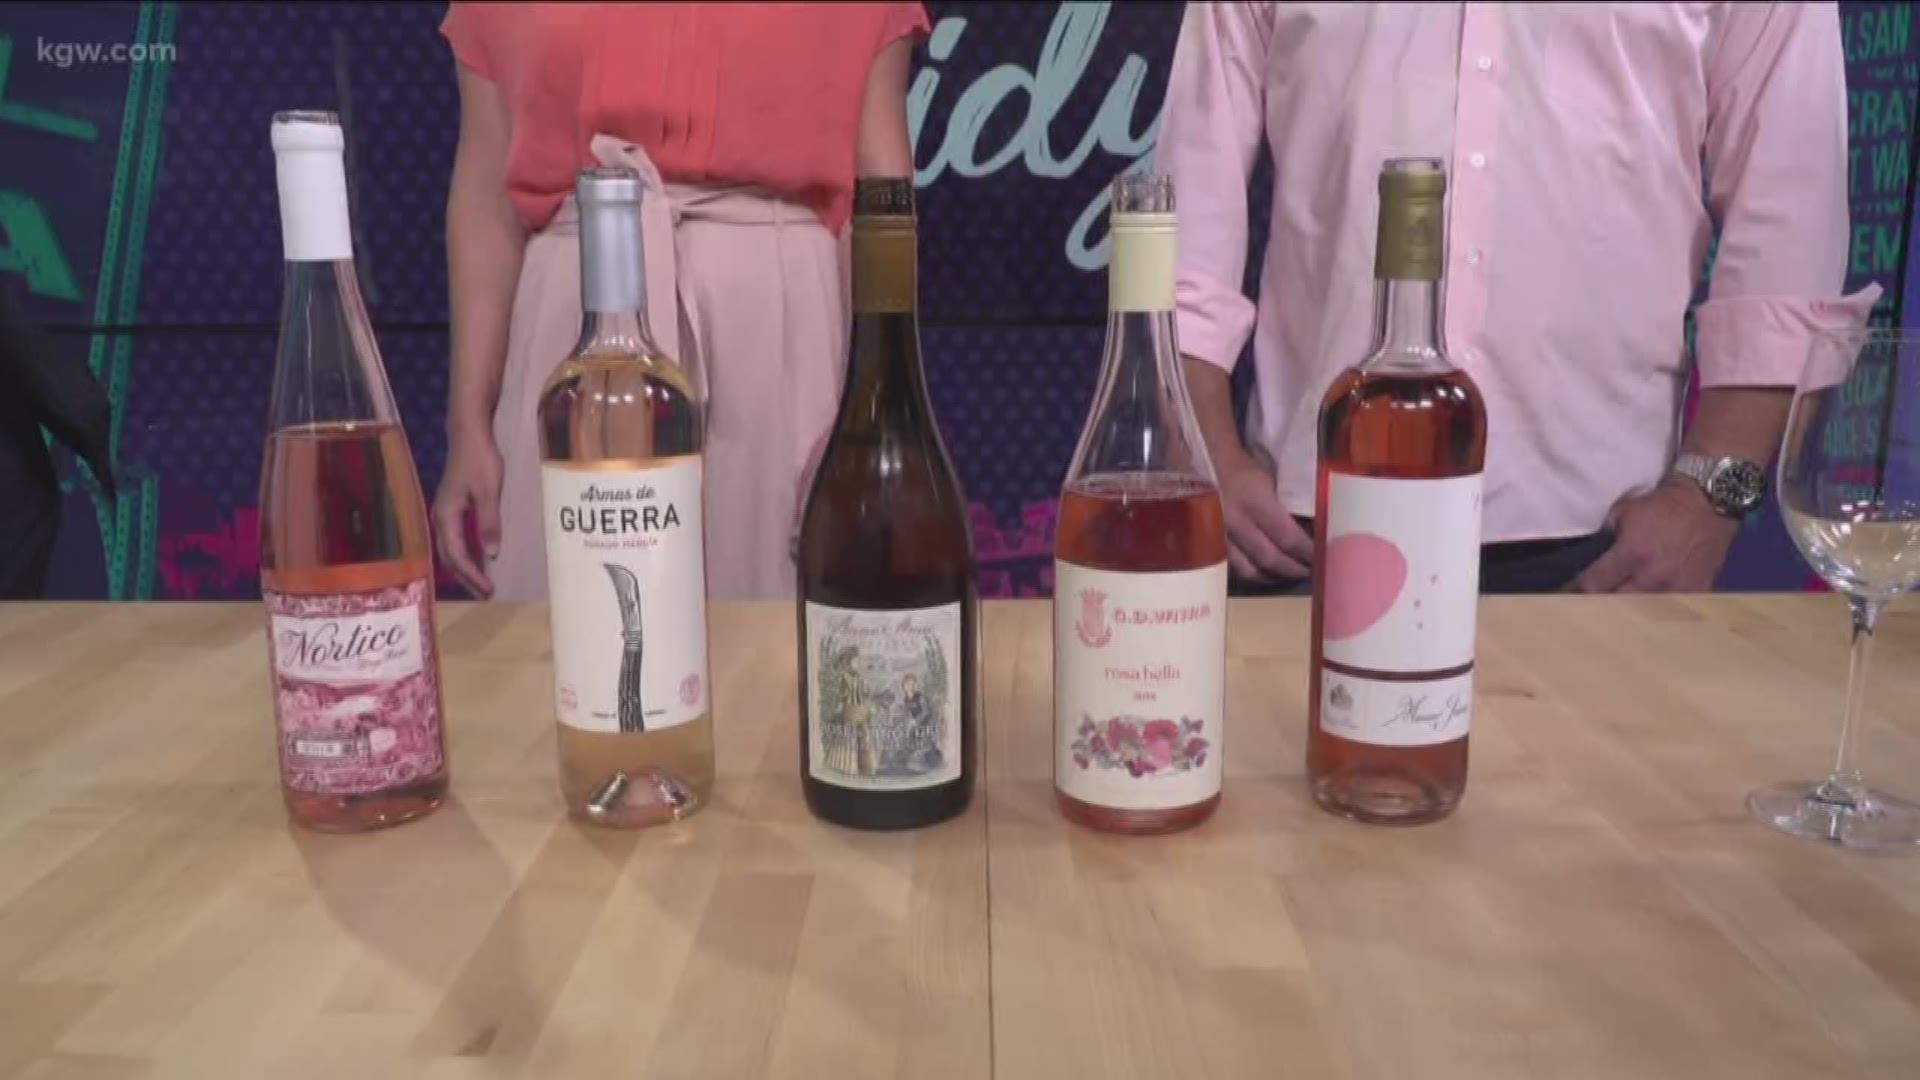 Dress up in pink and enjoy rosé all day at the Produce Row Cafe. The event benefits Make-A-Wish Oregon
producerowcafe.com
#TonightwithCassidy